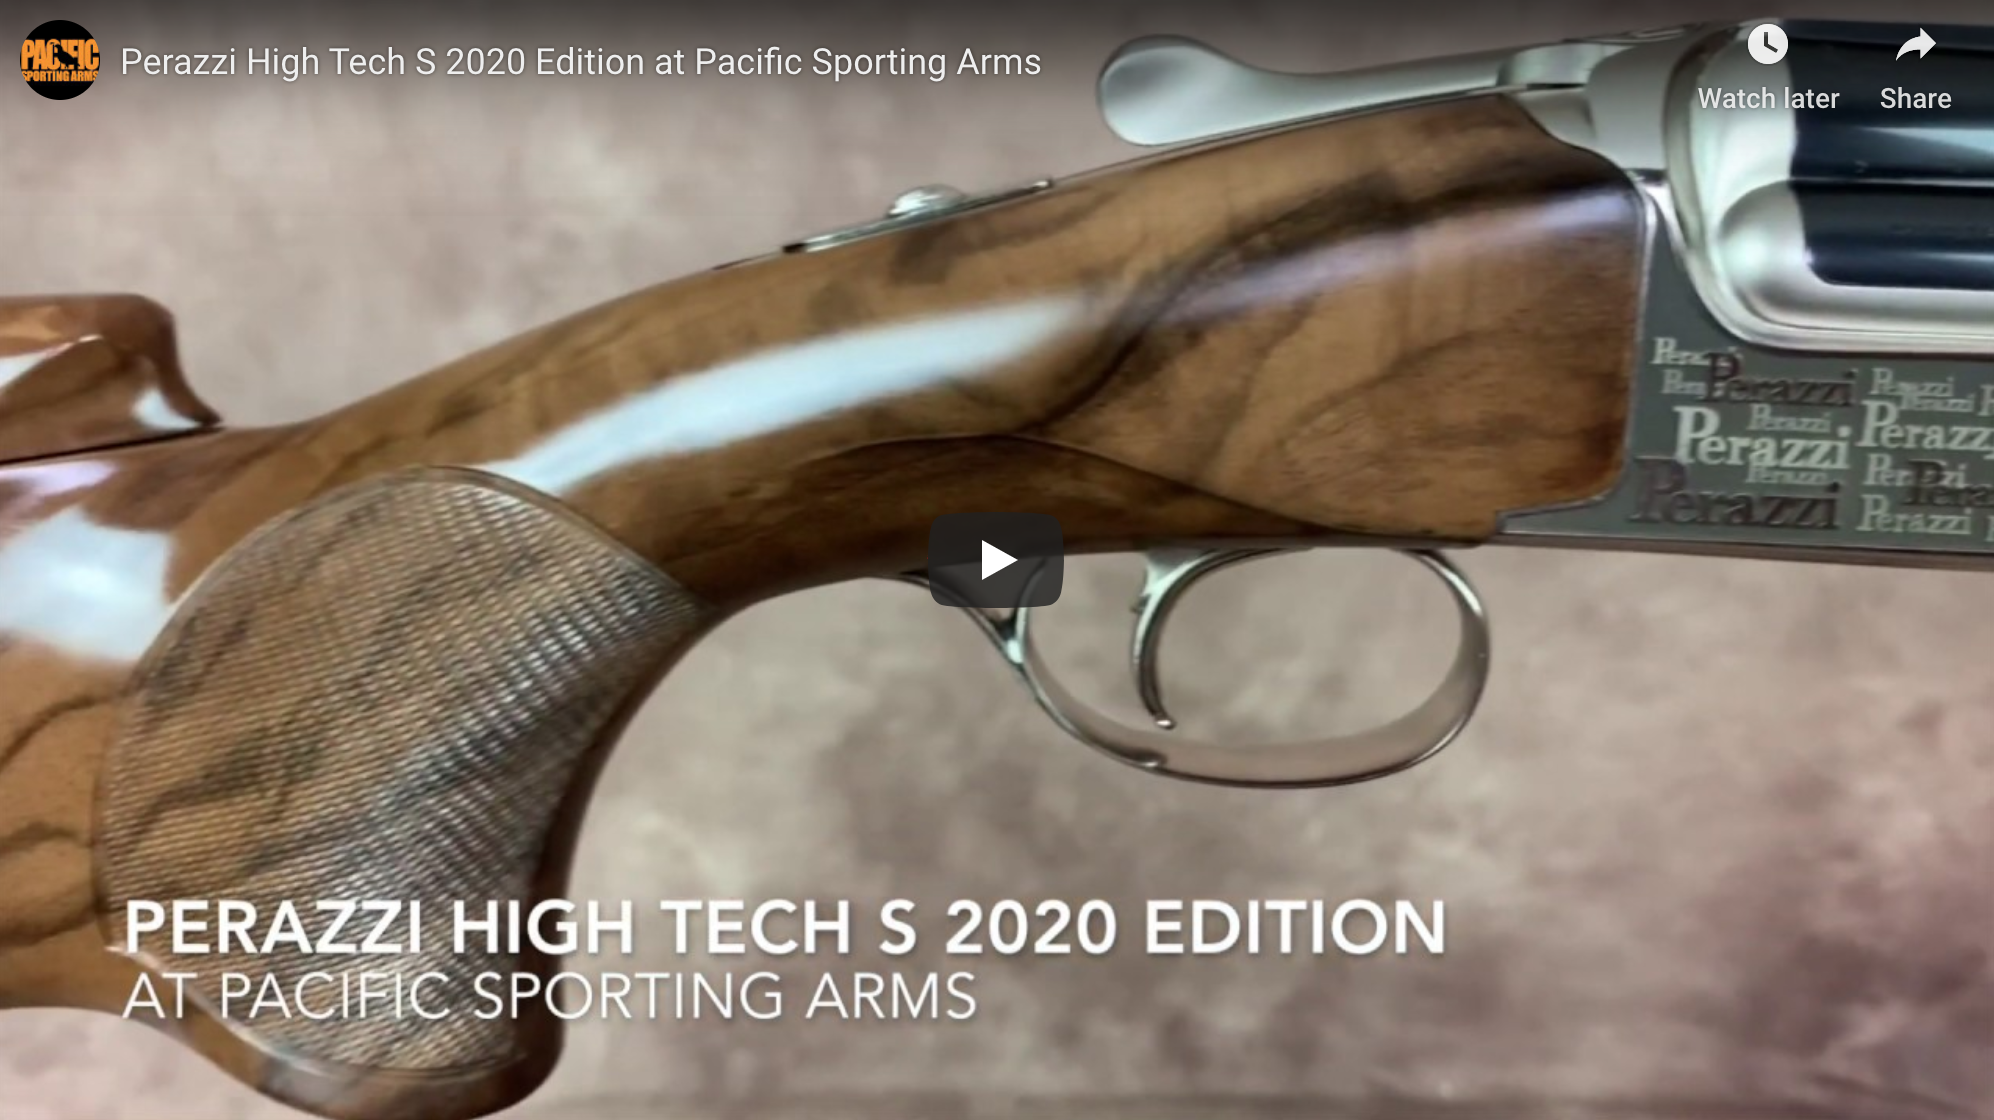 Introducing the New Perazzi High Tech S 2020 Limited Edition